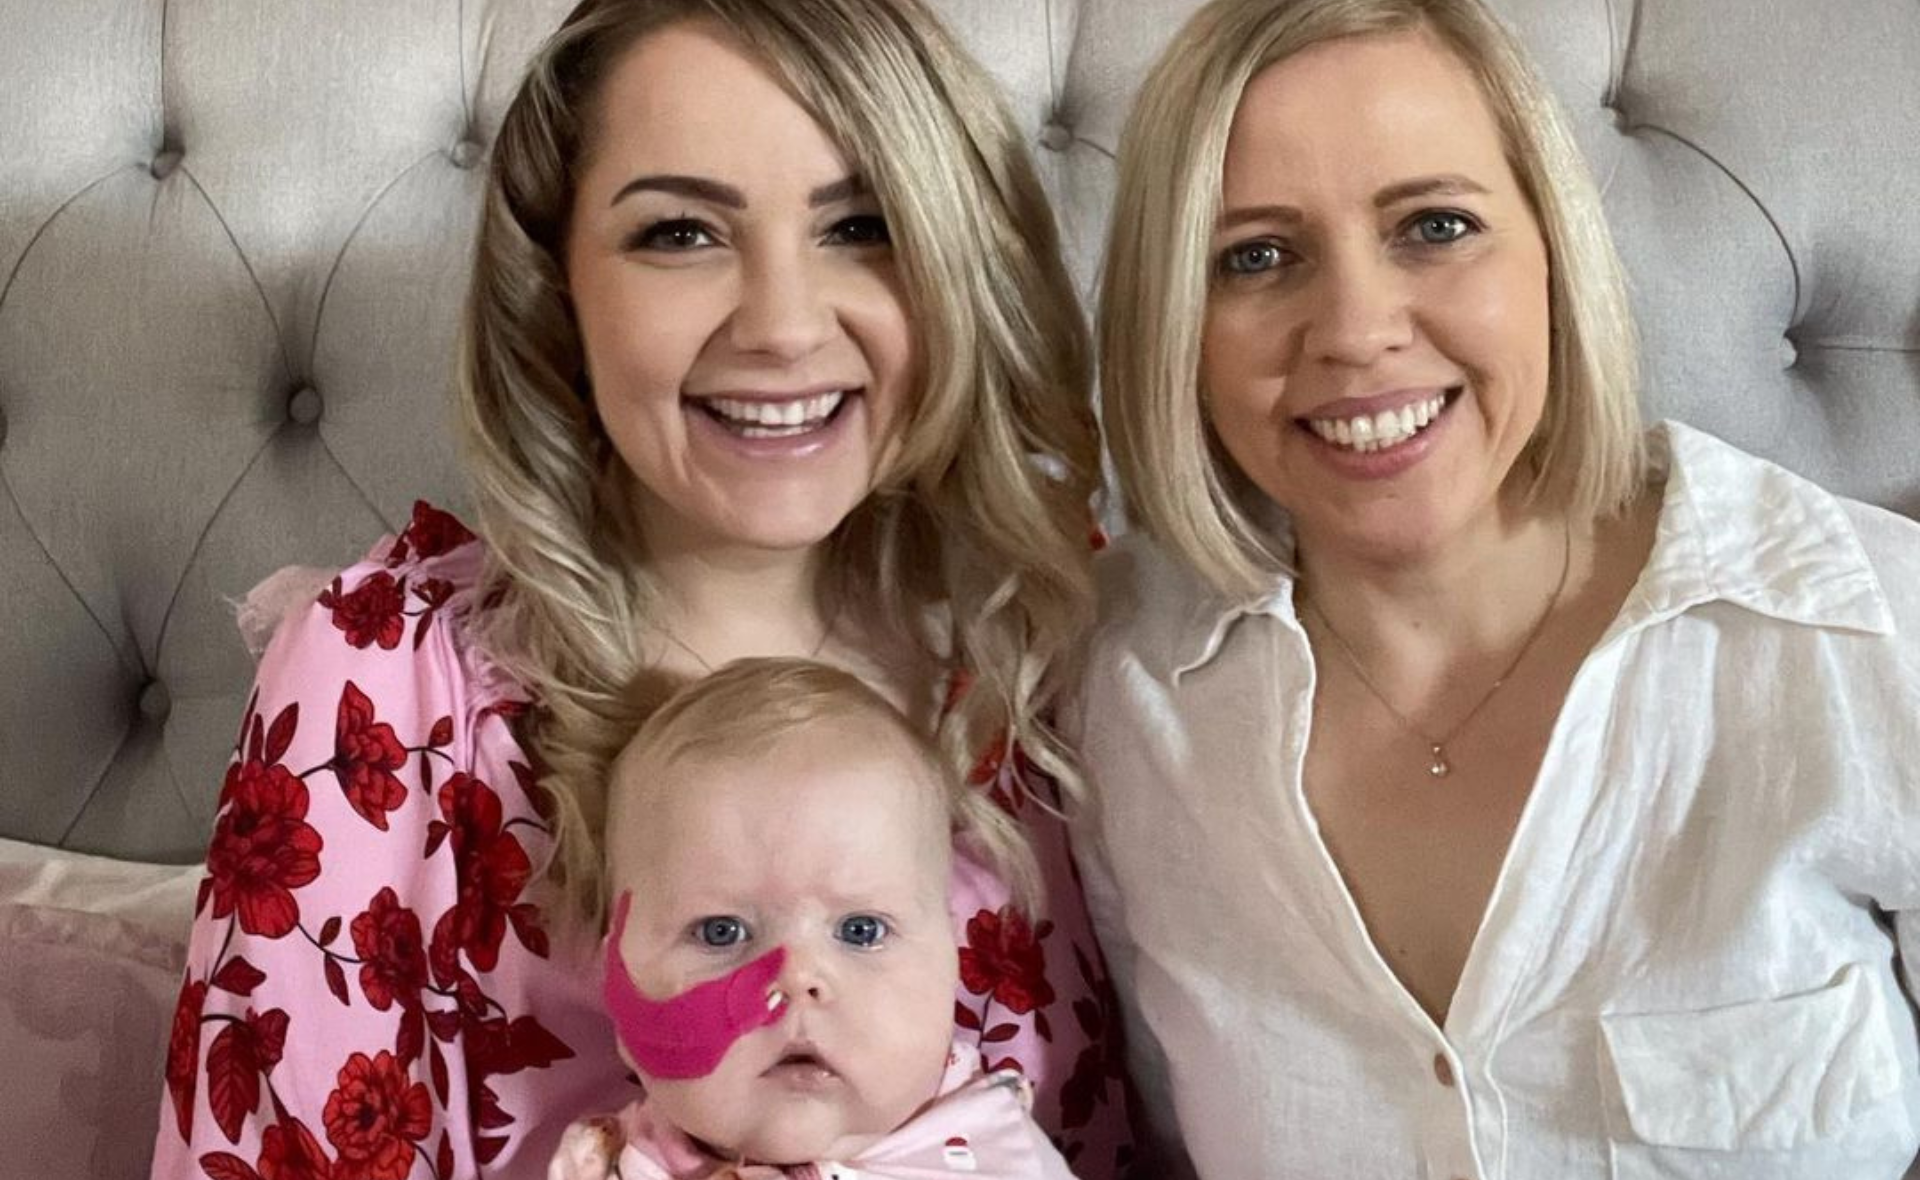 MKR’s Carly Saunders and Tresne Middleton mourn their first Mother’s Day without Poppy